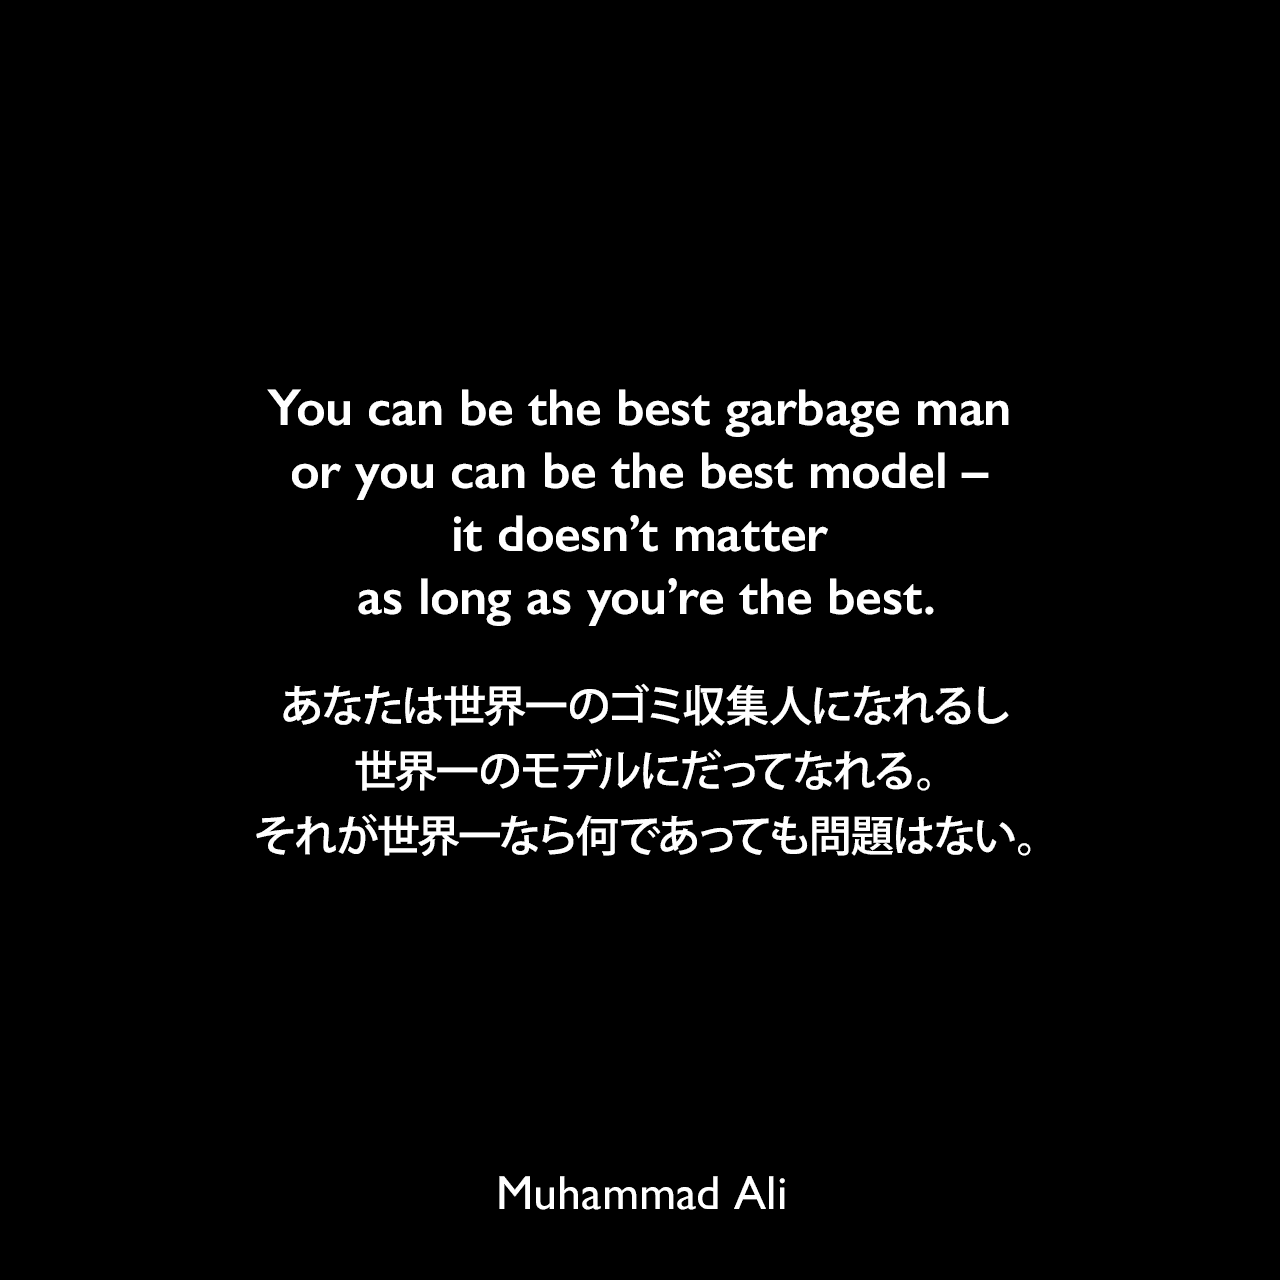 You can be the best garbage man or you can be the best model – it doesn’t matter as long as you’re the best.あなたは世界一のゴミ収集人になれるし、世界一のモデルにだってなれる。それが世界一なら何であっても問題はない。Muhammad Ali